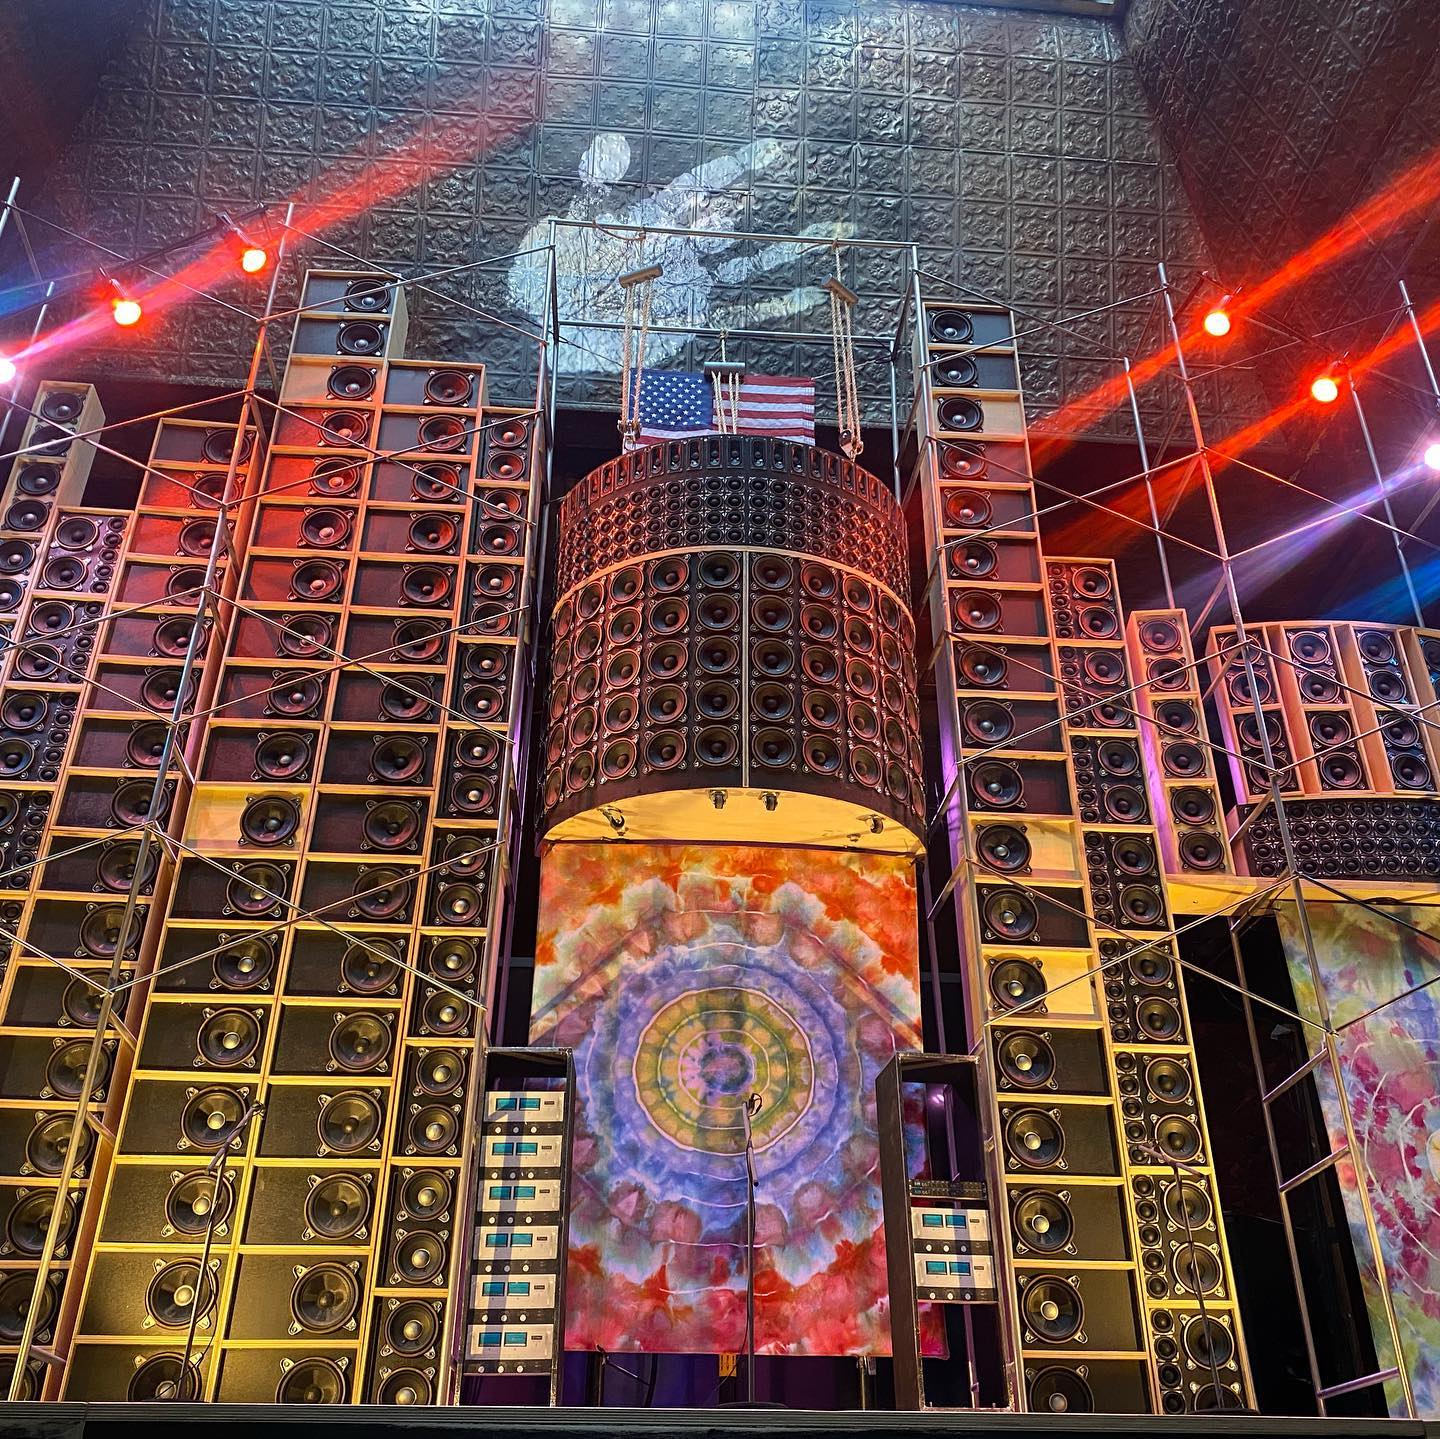 ct-man-building-replica-of-the-grateful-dead-s-wall-of-sound